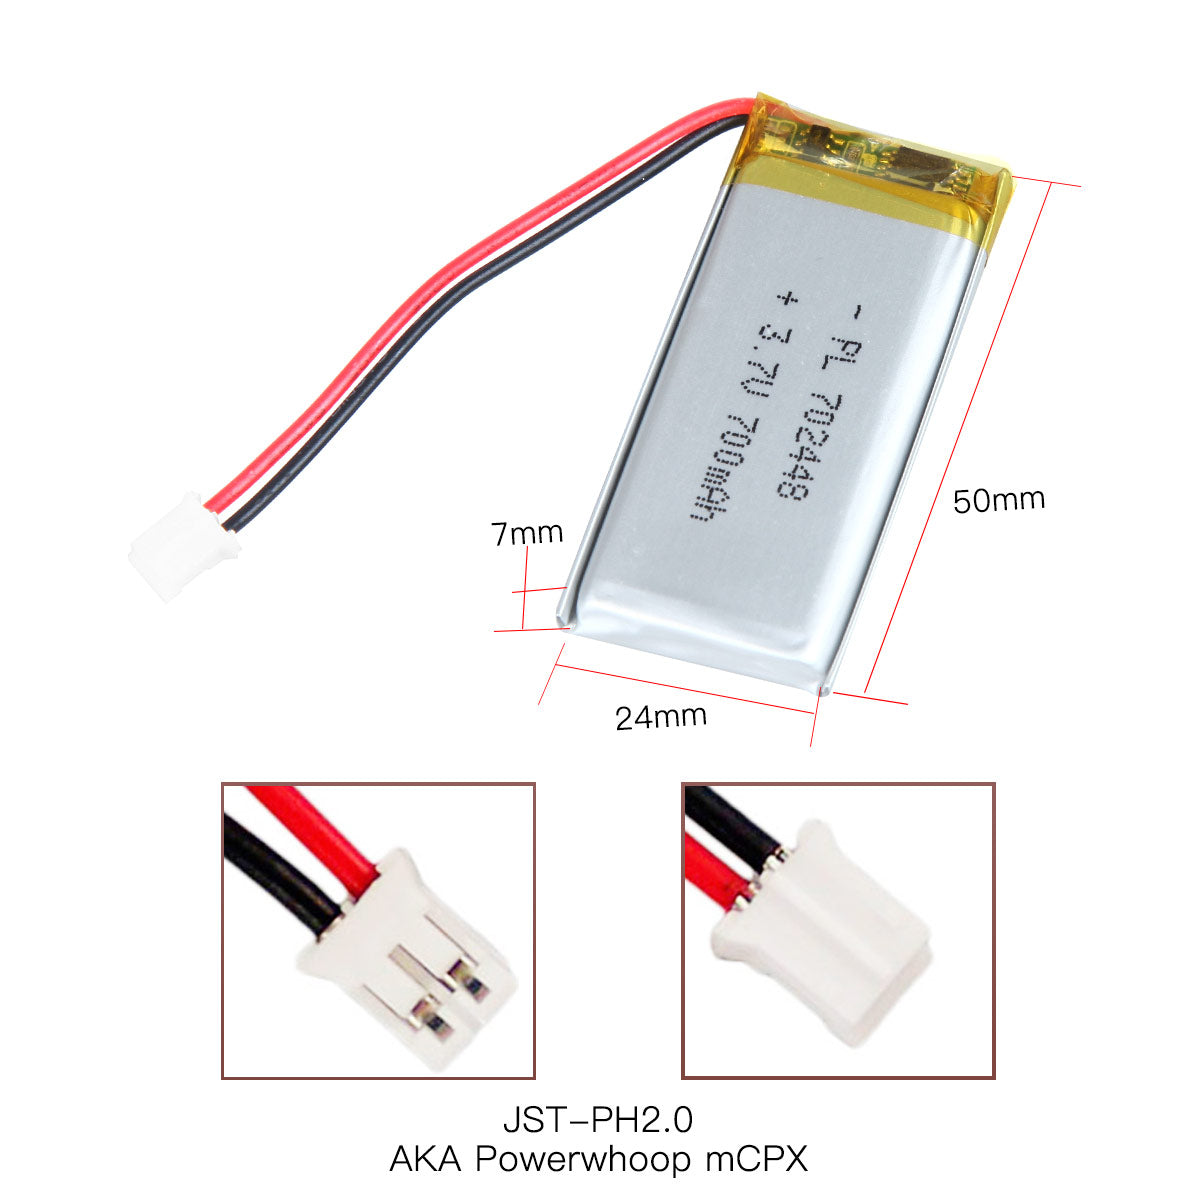 YDL 3.7V 700mAh 702448 Rechargeable Lithium Polymer Battery Length 50mm